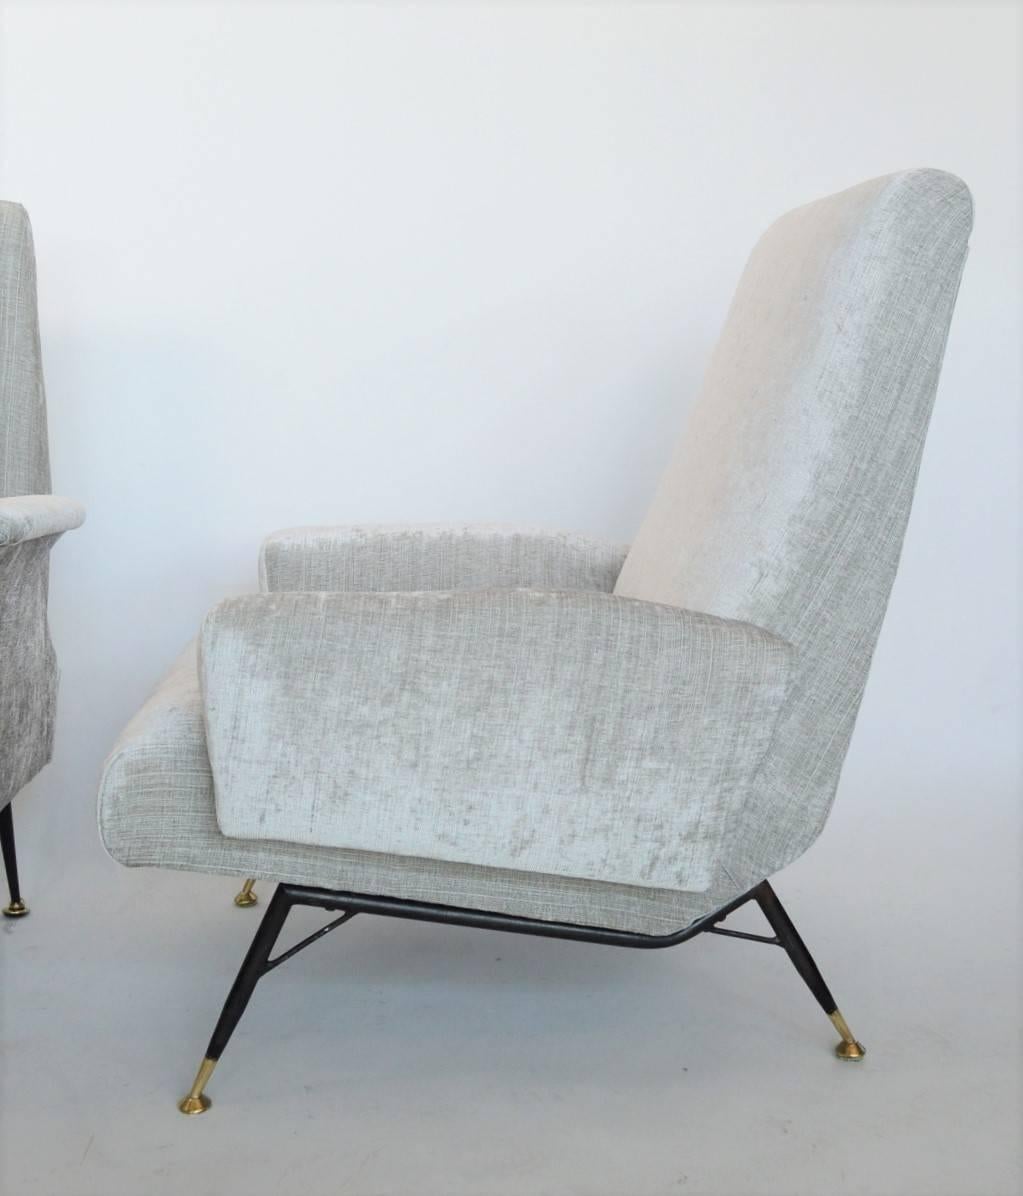 Beautiful and elegant Italian vintage armchair, original from the 1950s.
The armchair have been restored completely internally with high quality material and reupholstered with silver-white soft chenille fabric of best quality. (very similar to